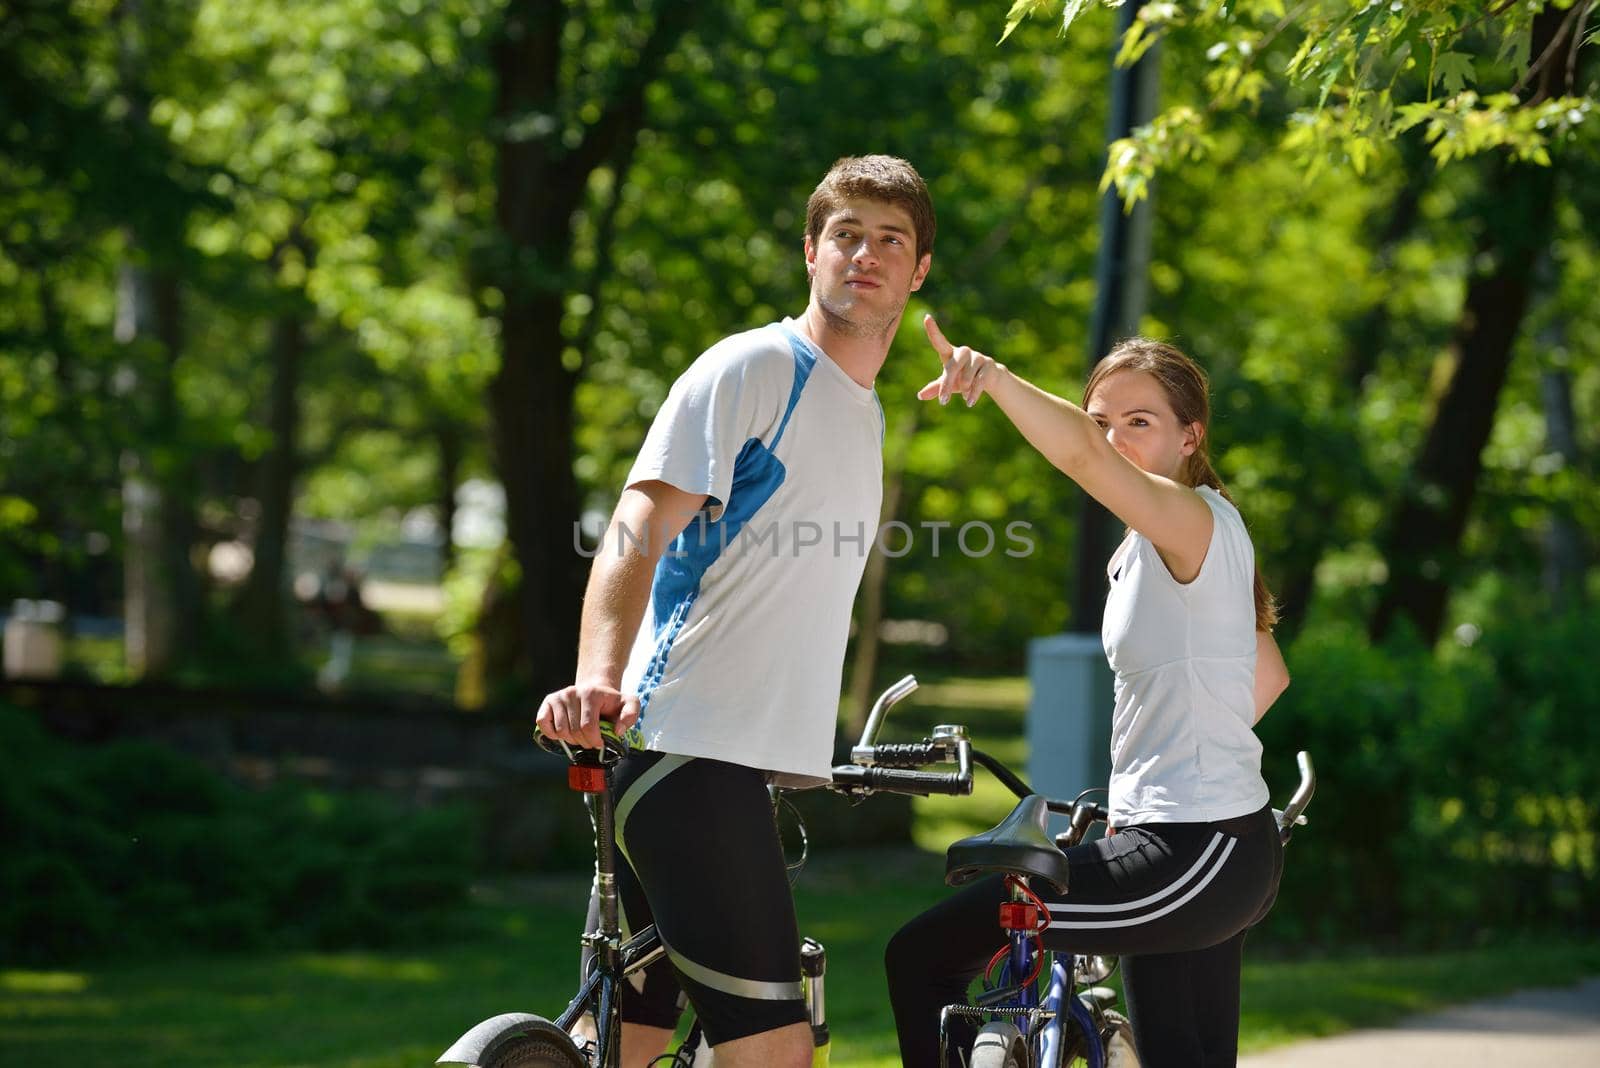 Happy couple ride bicycle outdoors, health lifestyle fun love romance concept